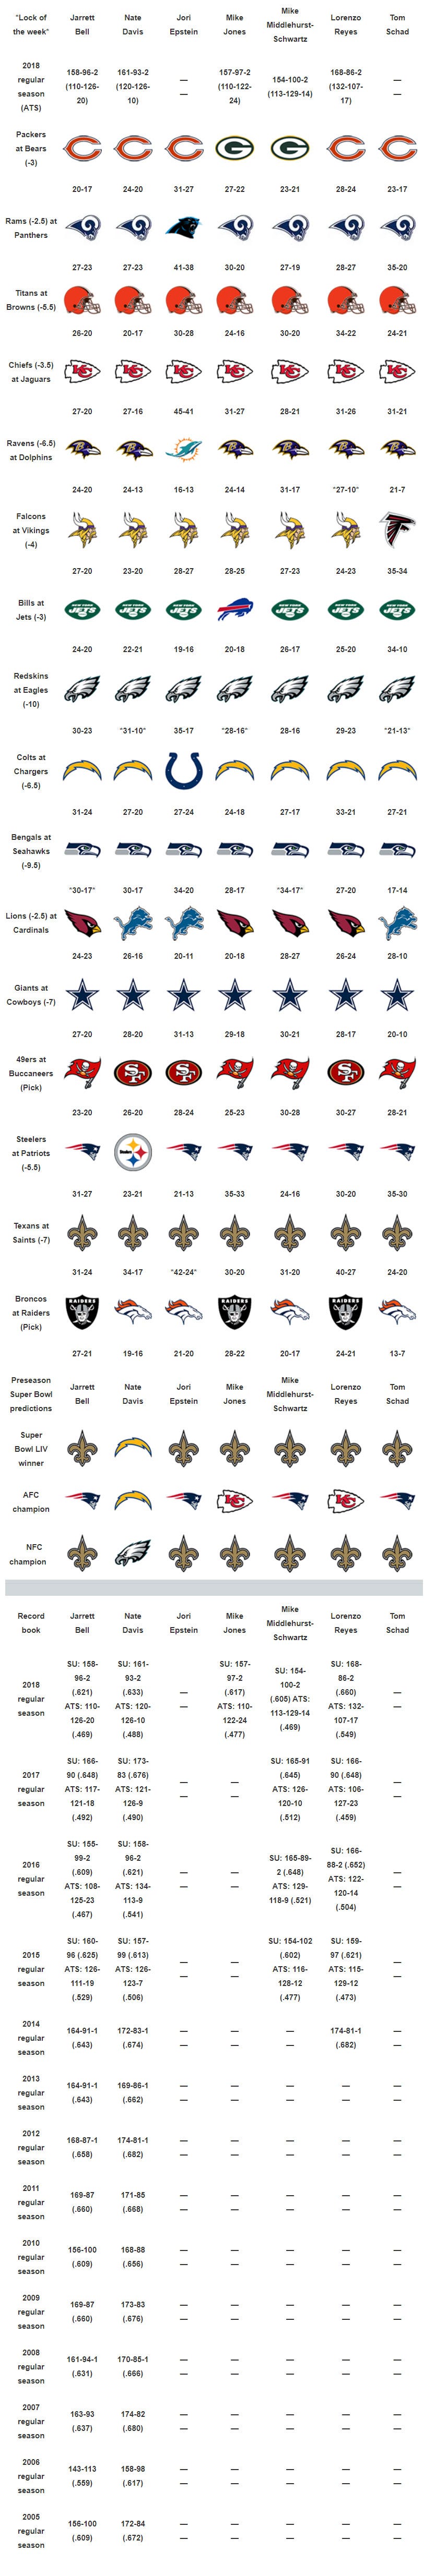 NFL Week 1: Picks and preview